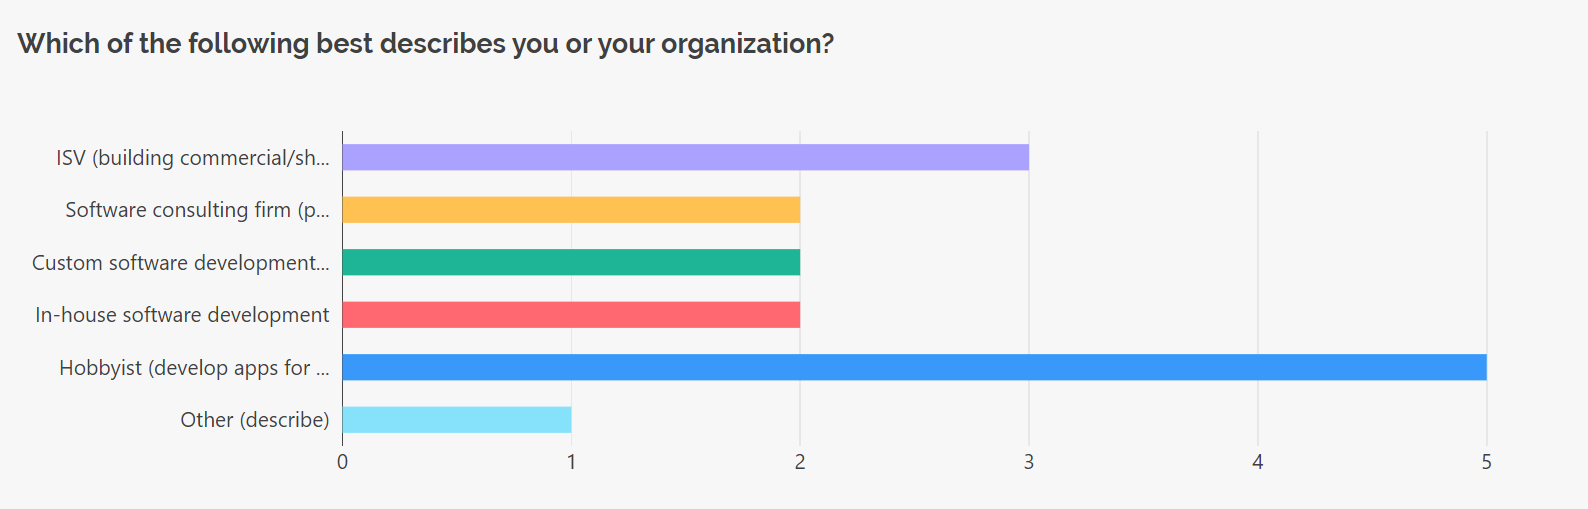 SurveyJS Dashboard: Default Bar Chart visualizer for Radiogroup questions